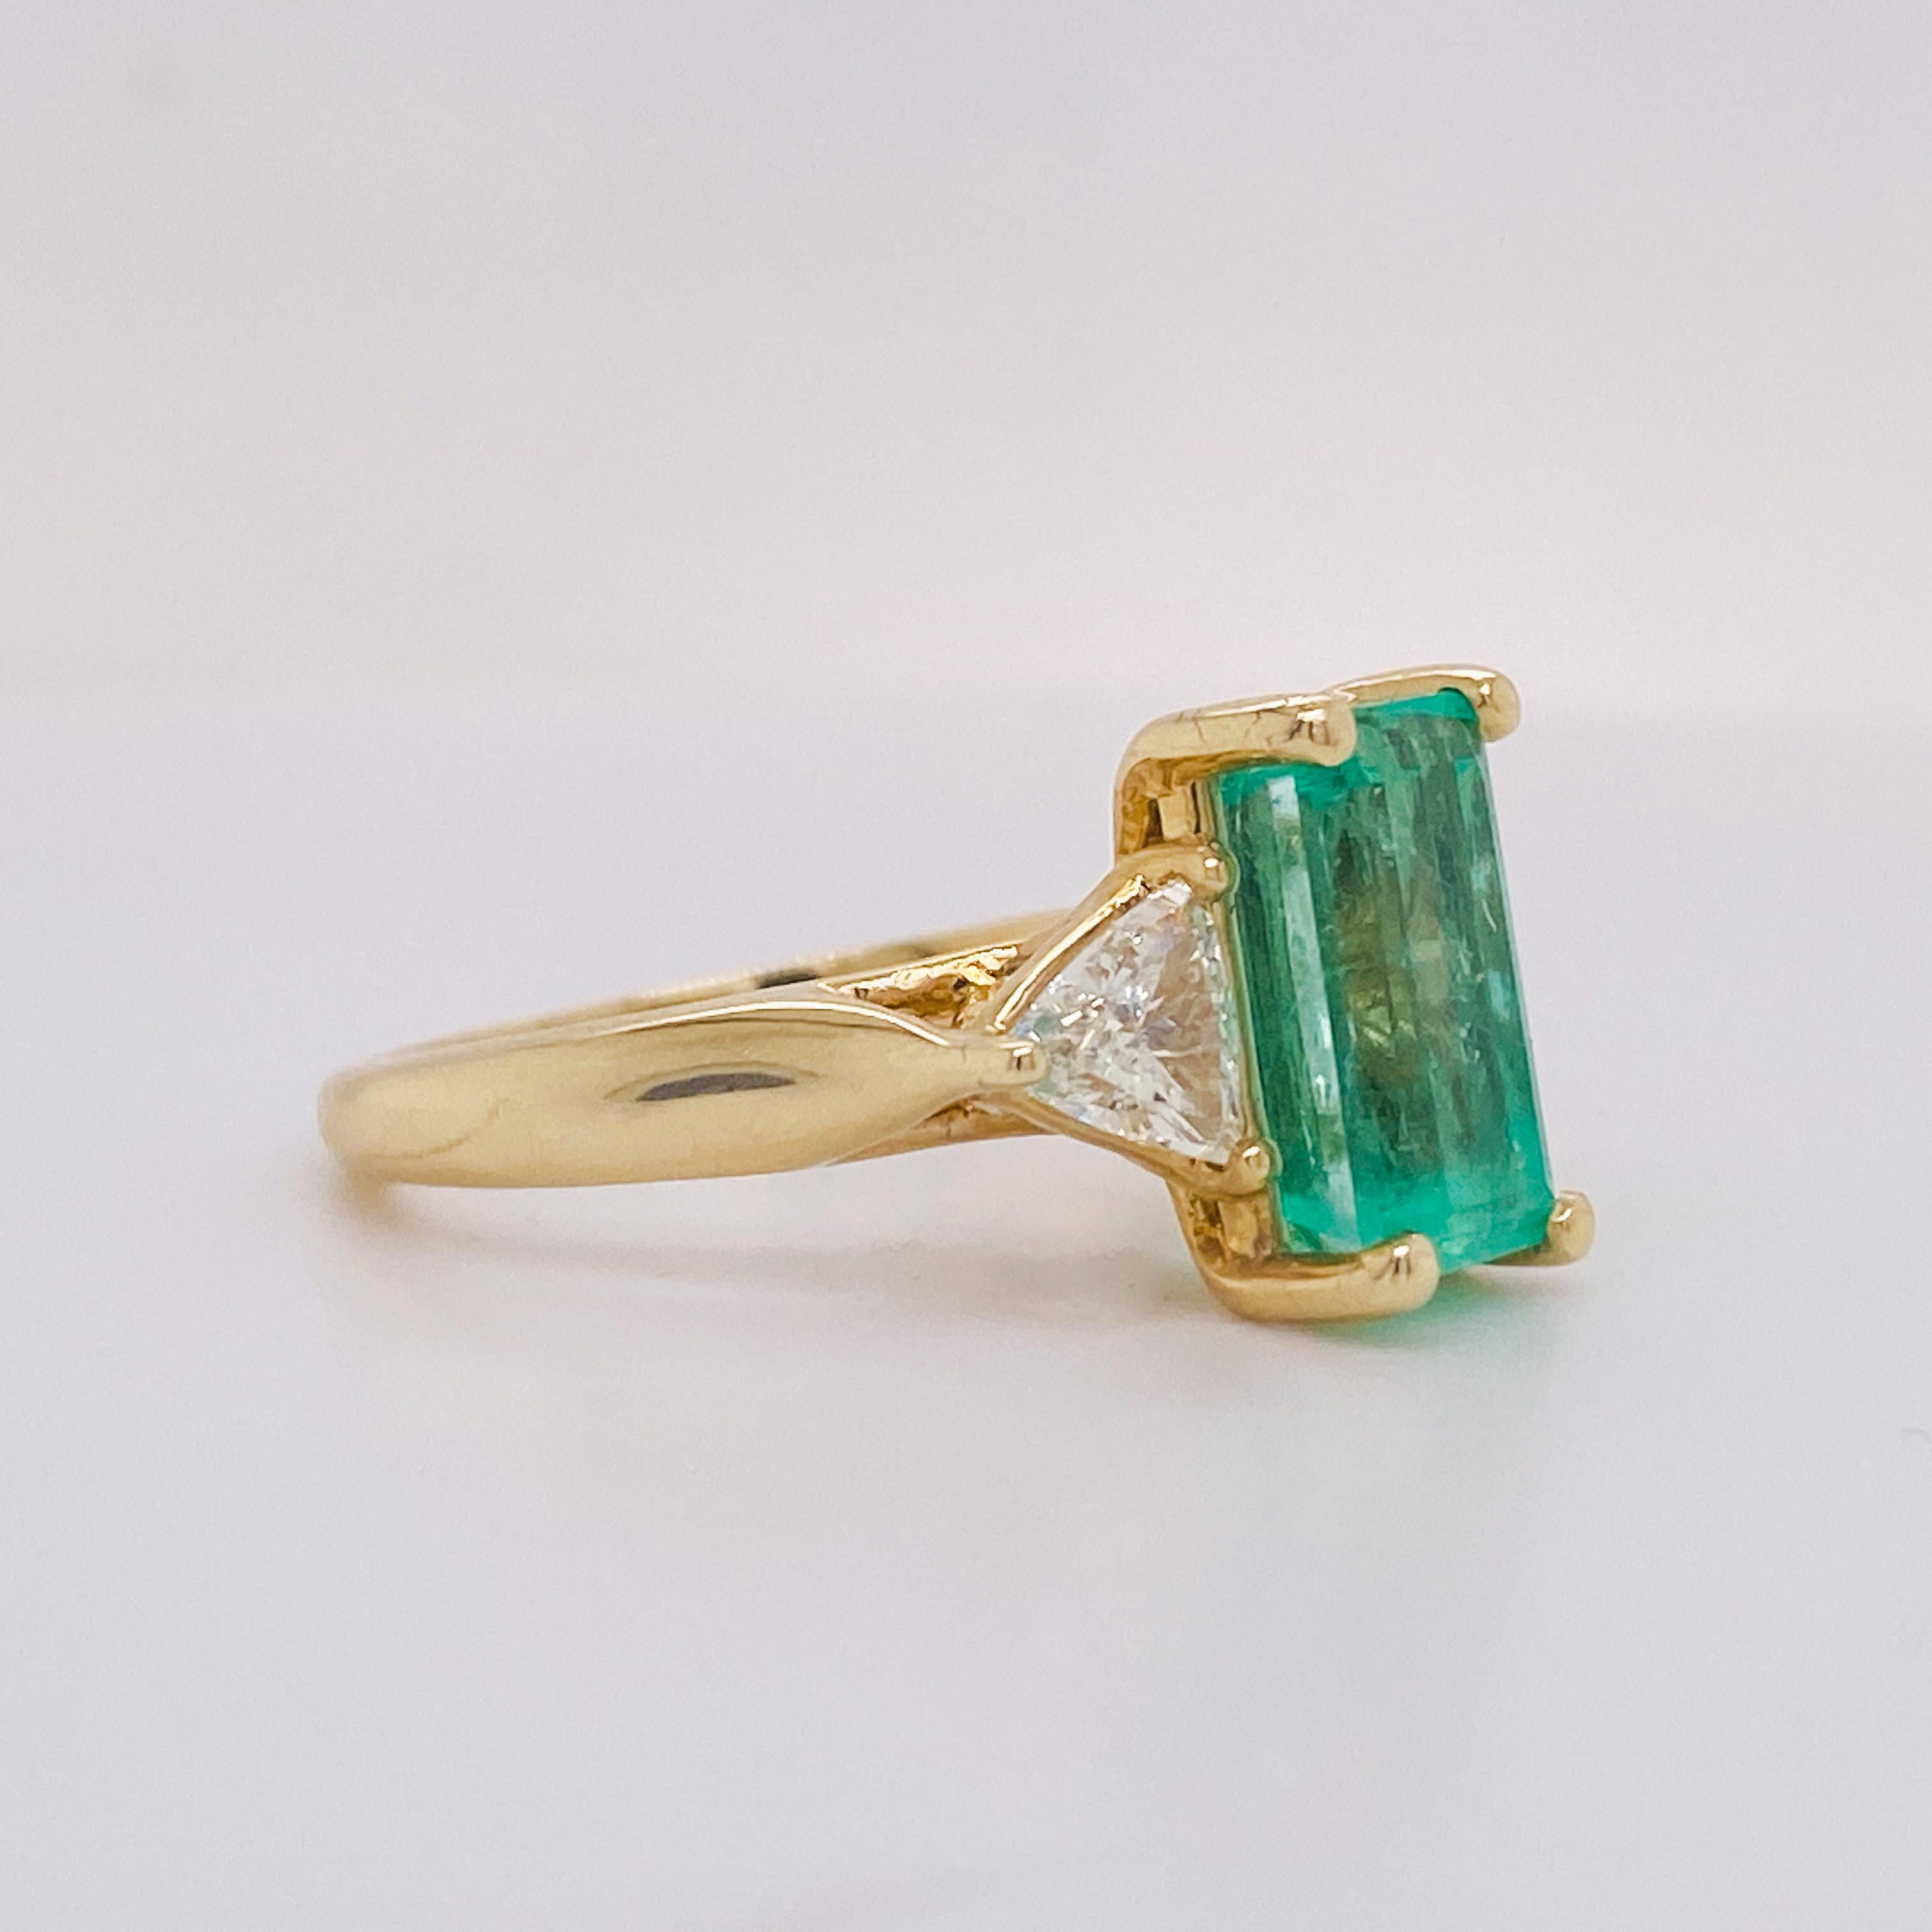 Emerald is the birthstone for the month of May. Celebrate your May loved one with this show stopping emerald and diamond ring! The long rectangular shape of the emerald is beautifully flattering on long graceful fingers. This 3.20 carat emerald is